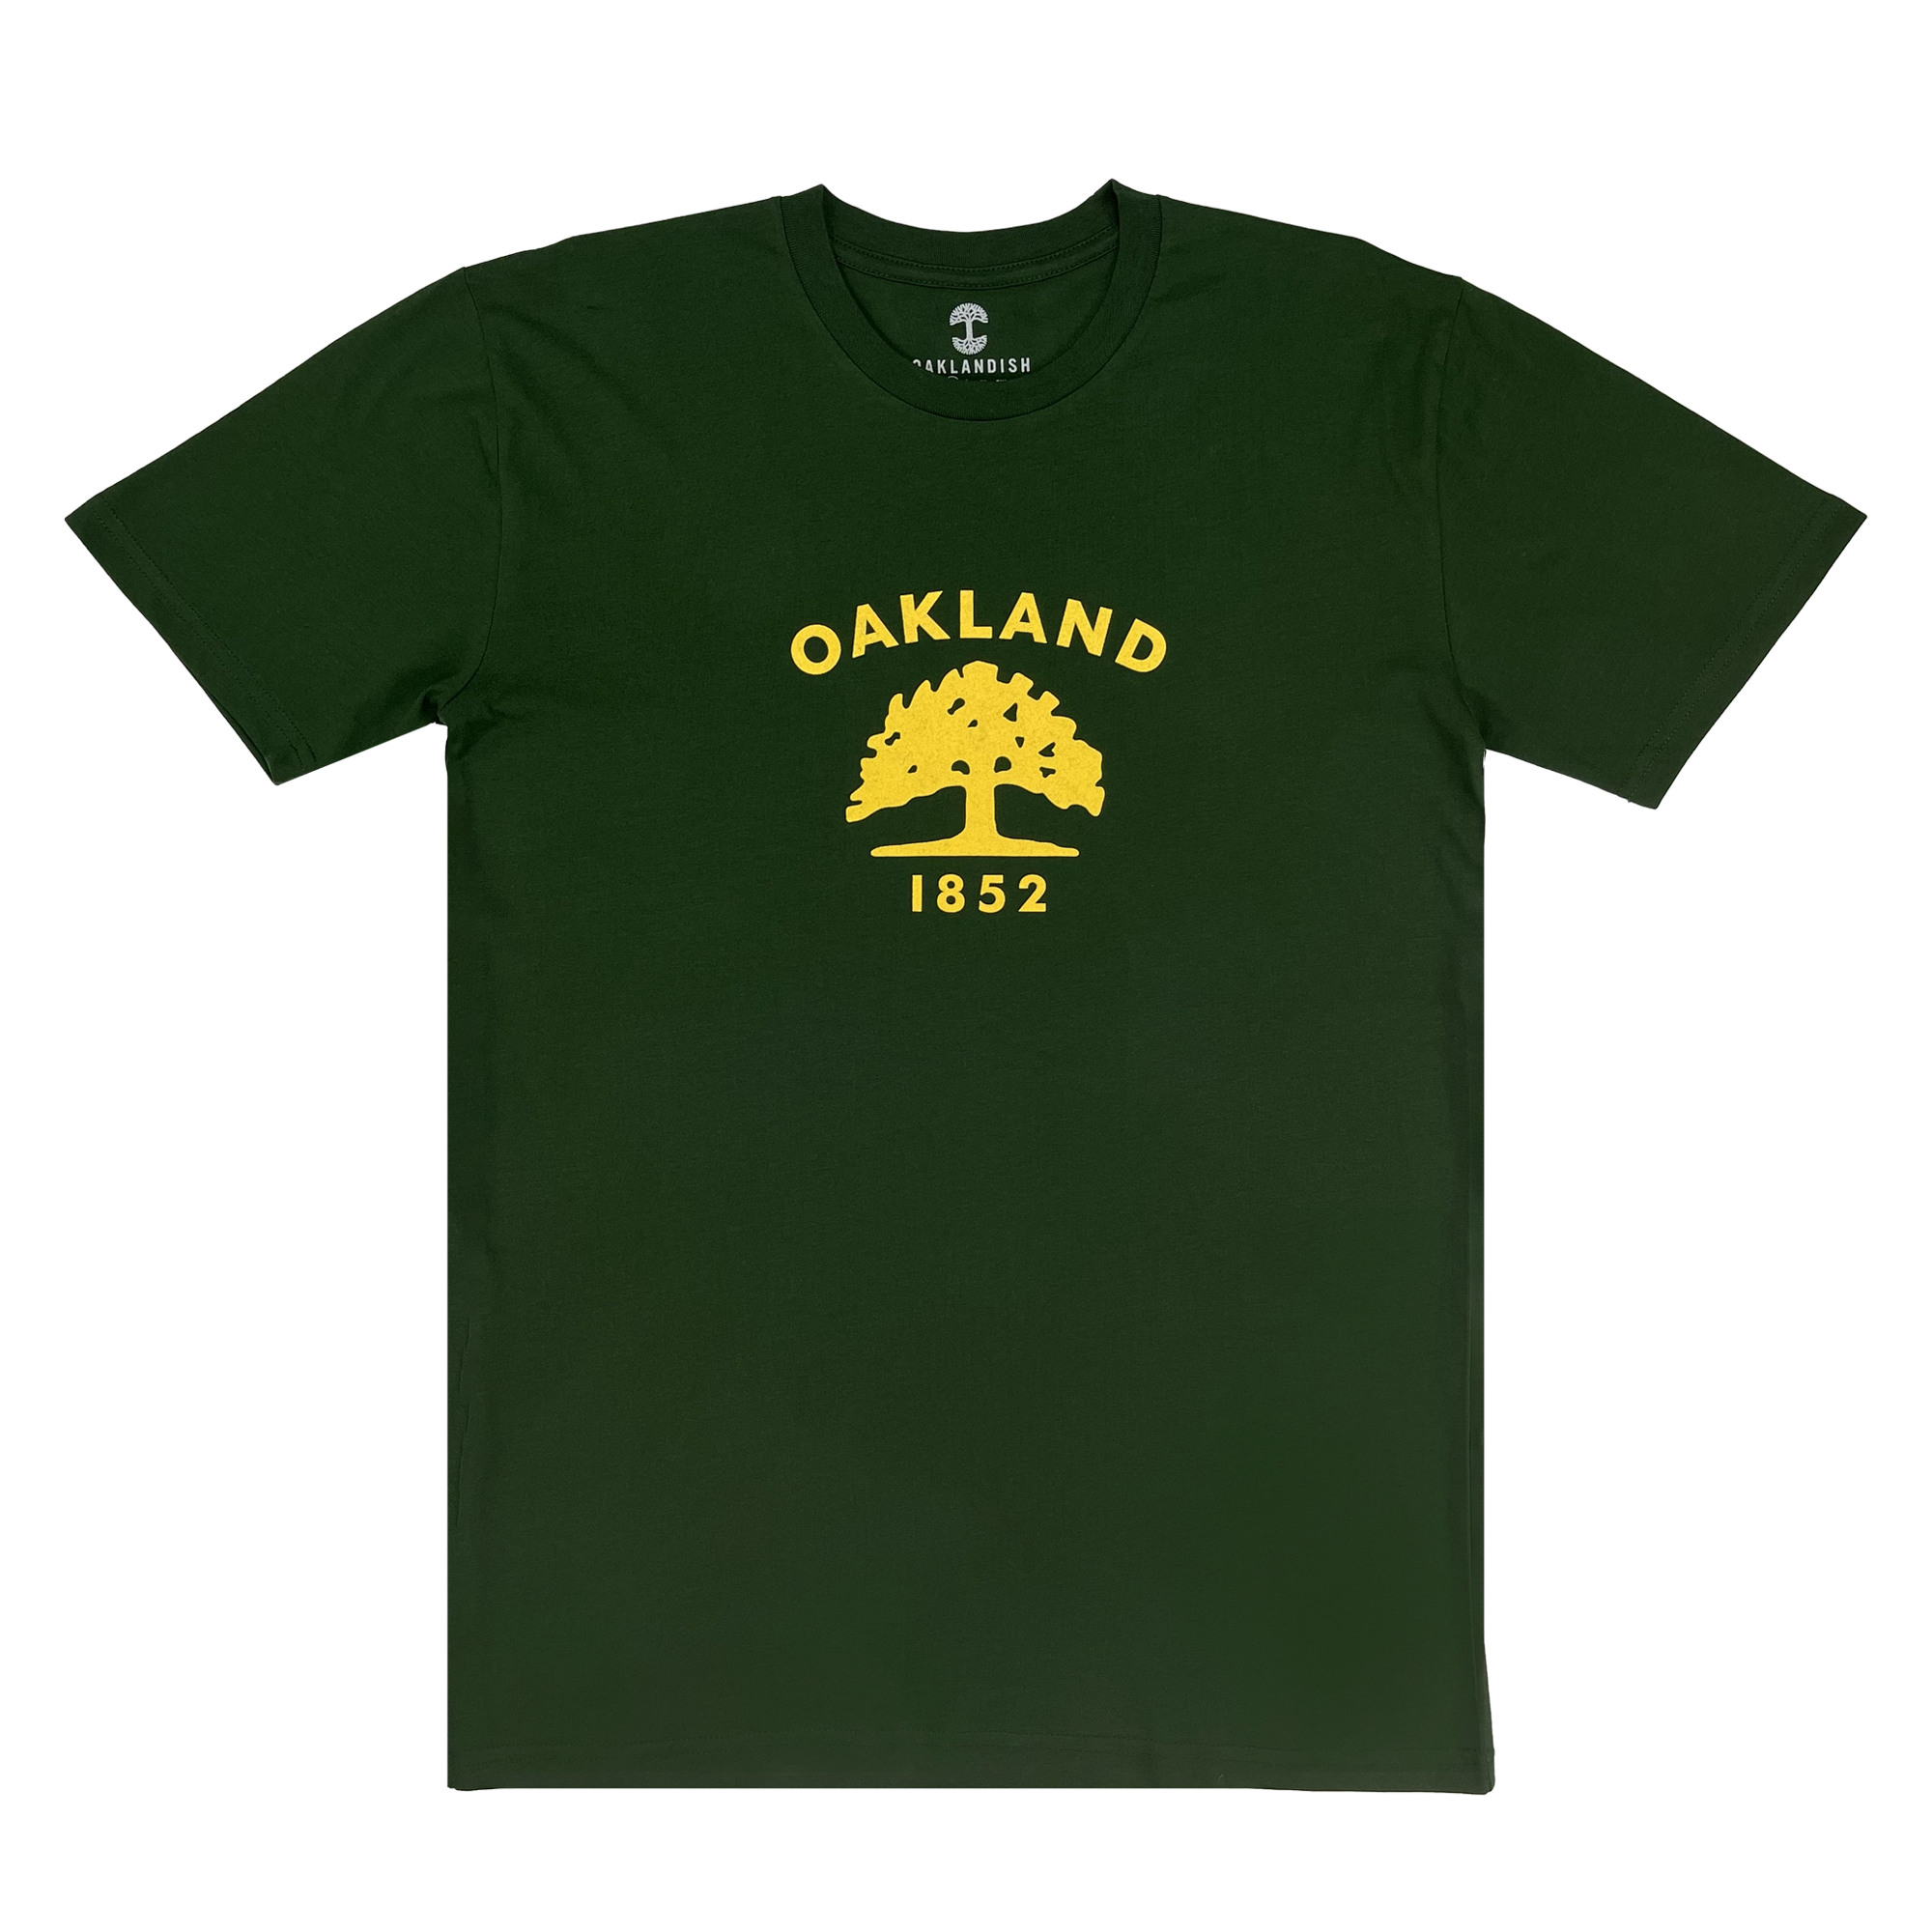 Forest green  t-shirt with yellow Oakland 1852 Flag graphic.